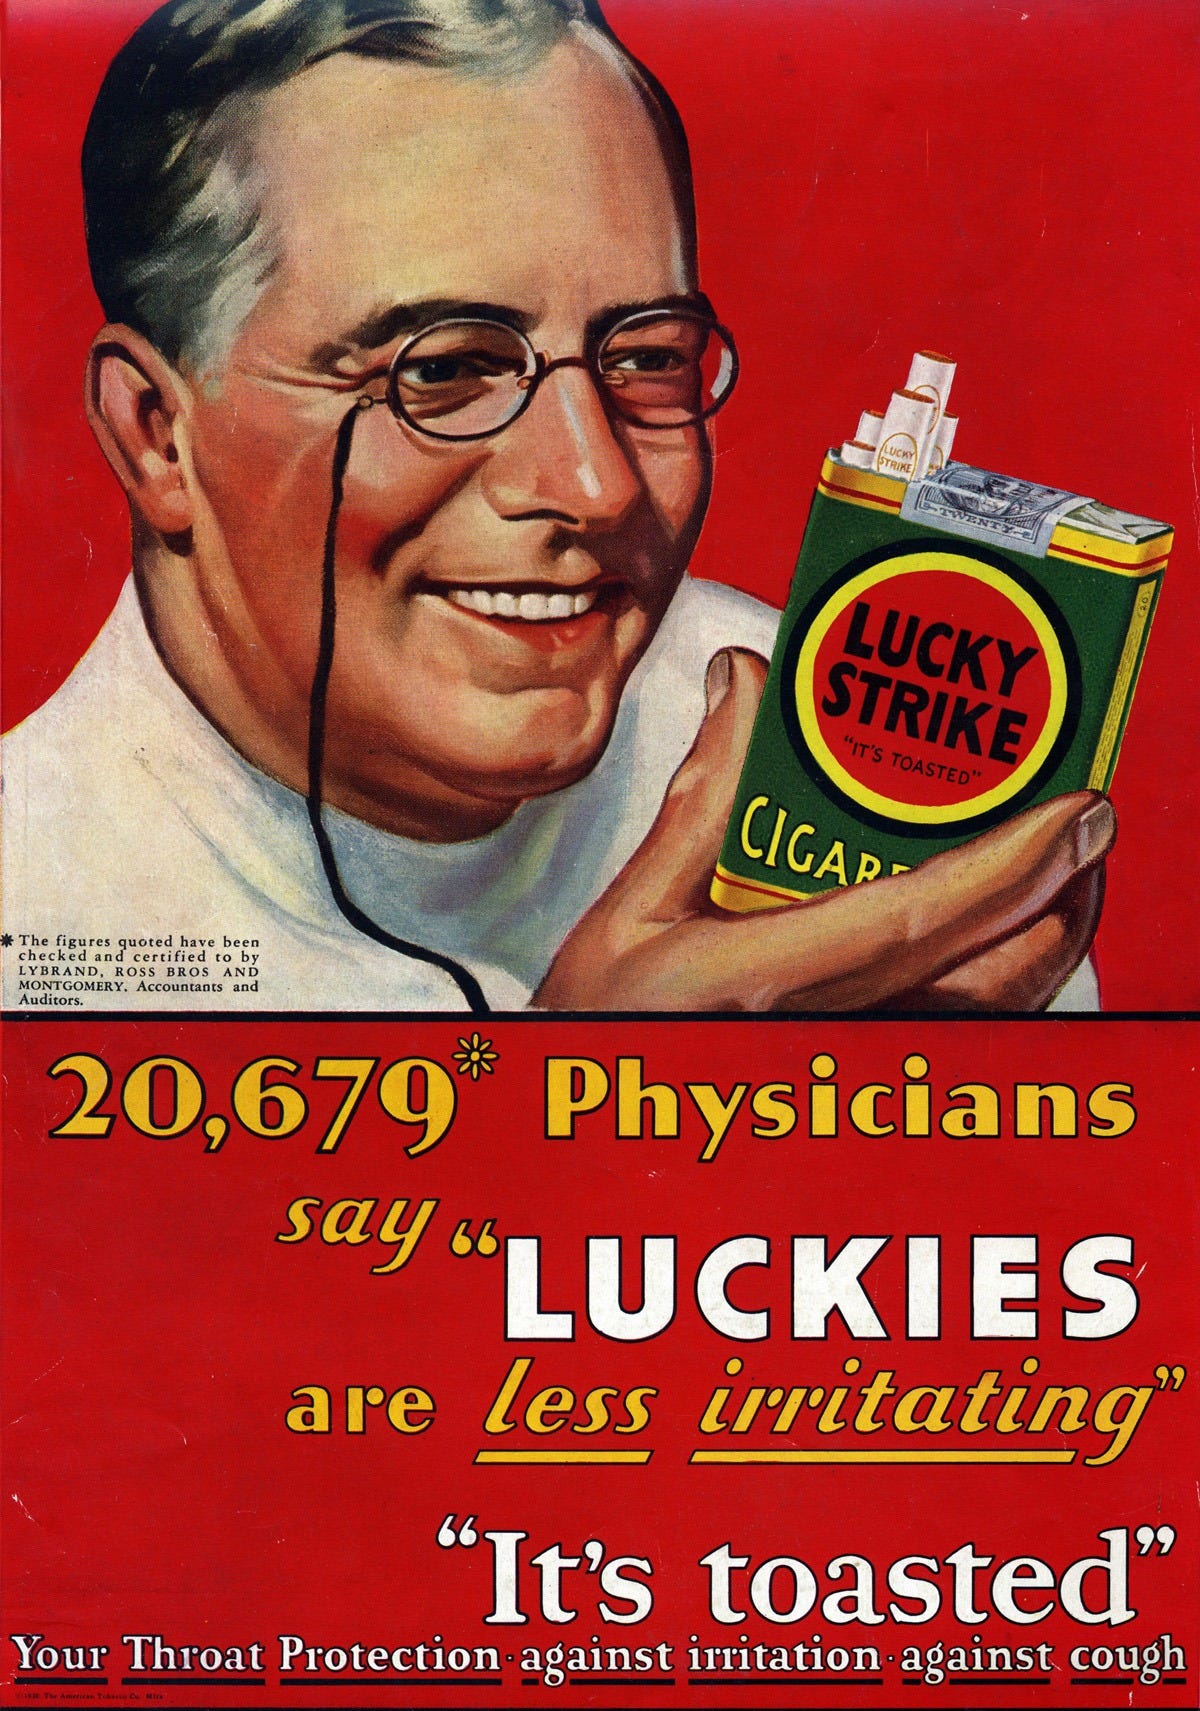 Against a red background, a grey-haired smiling man with pince-nez spectacles is looking at a packet of Lucky Strike cigarettes that he holds in his hand. He is wearing a white clinical shirt, implying that he is a doctor. The text says ‘20,679 physicians say “Luckies” are less irritating.’ “It’s toasted”, “Your throat protection against irritation, against cough.’